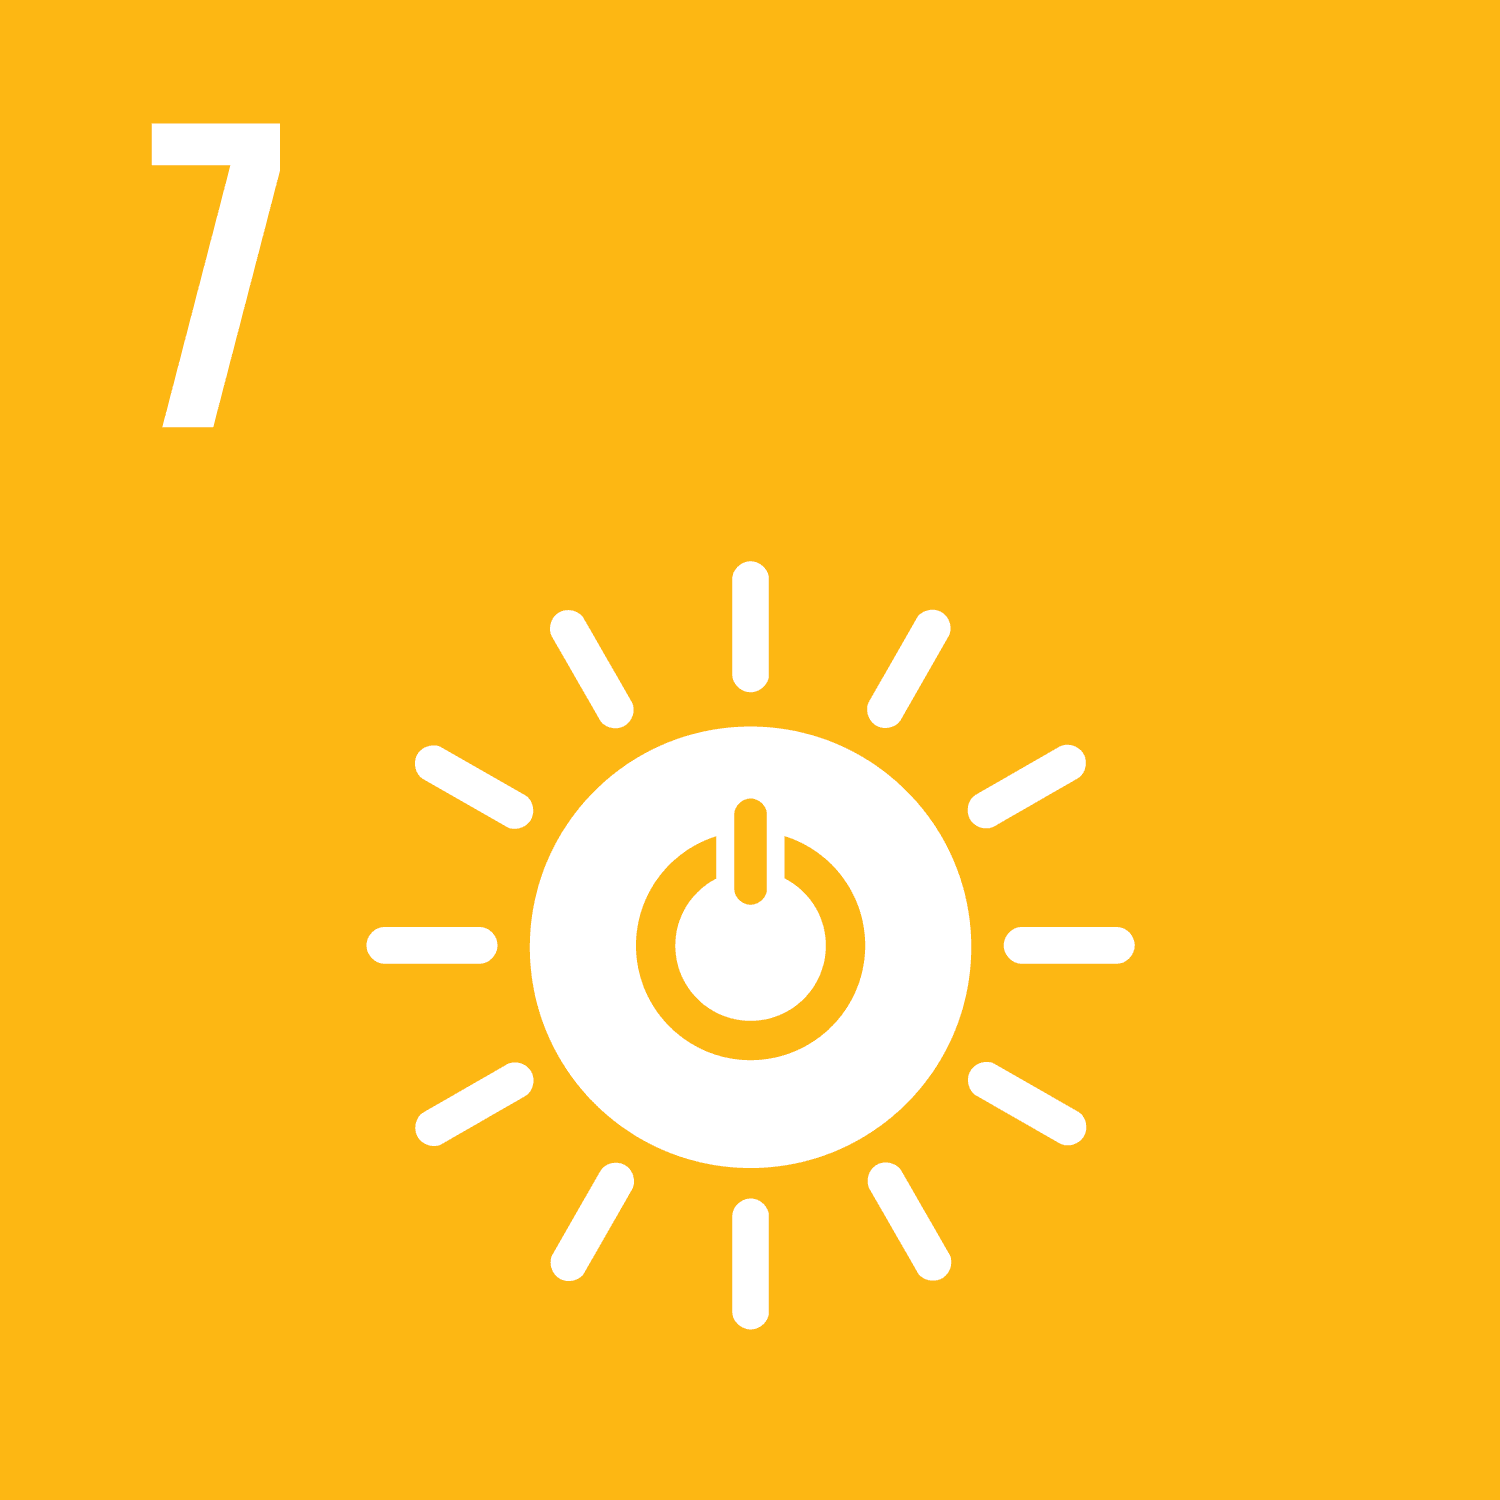 SDG 7. Affordable and clean energy.